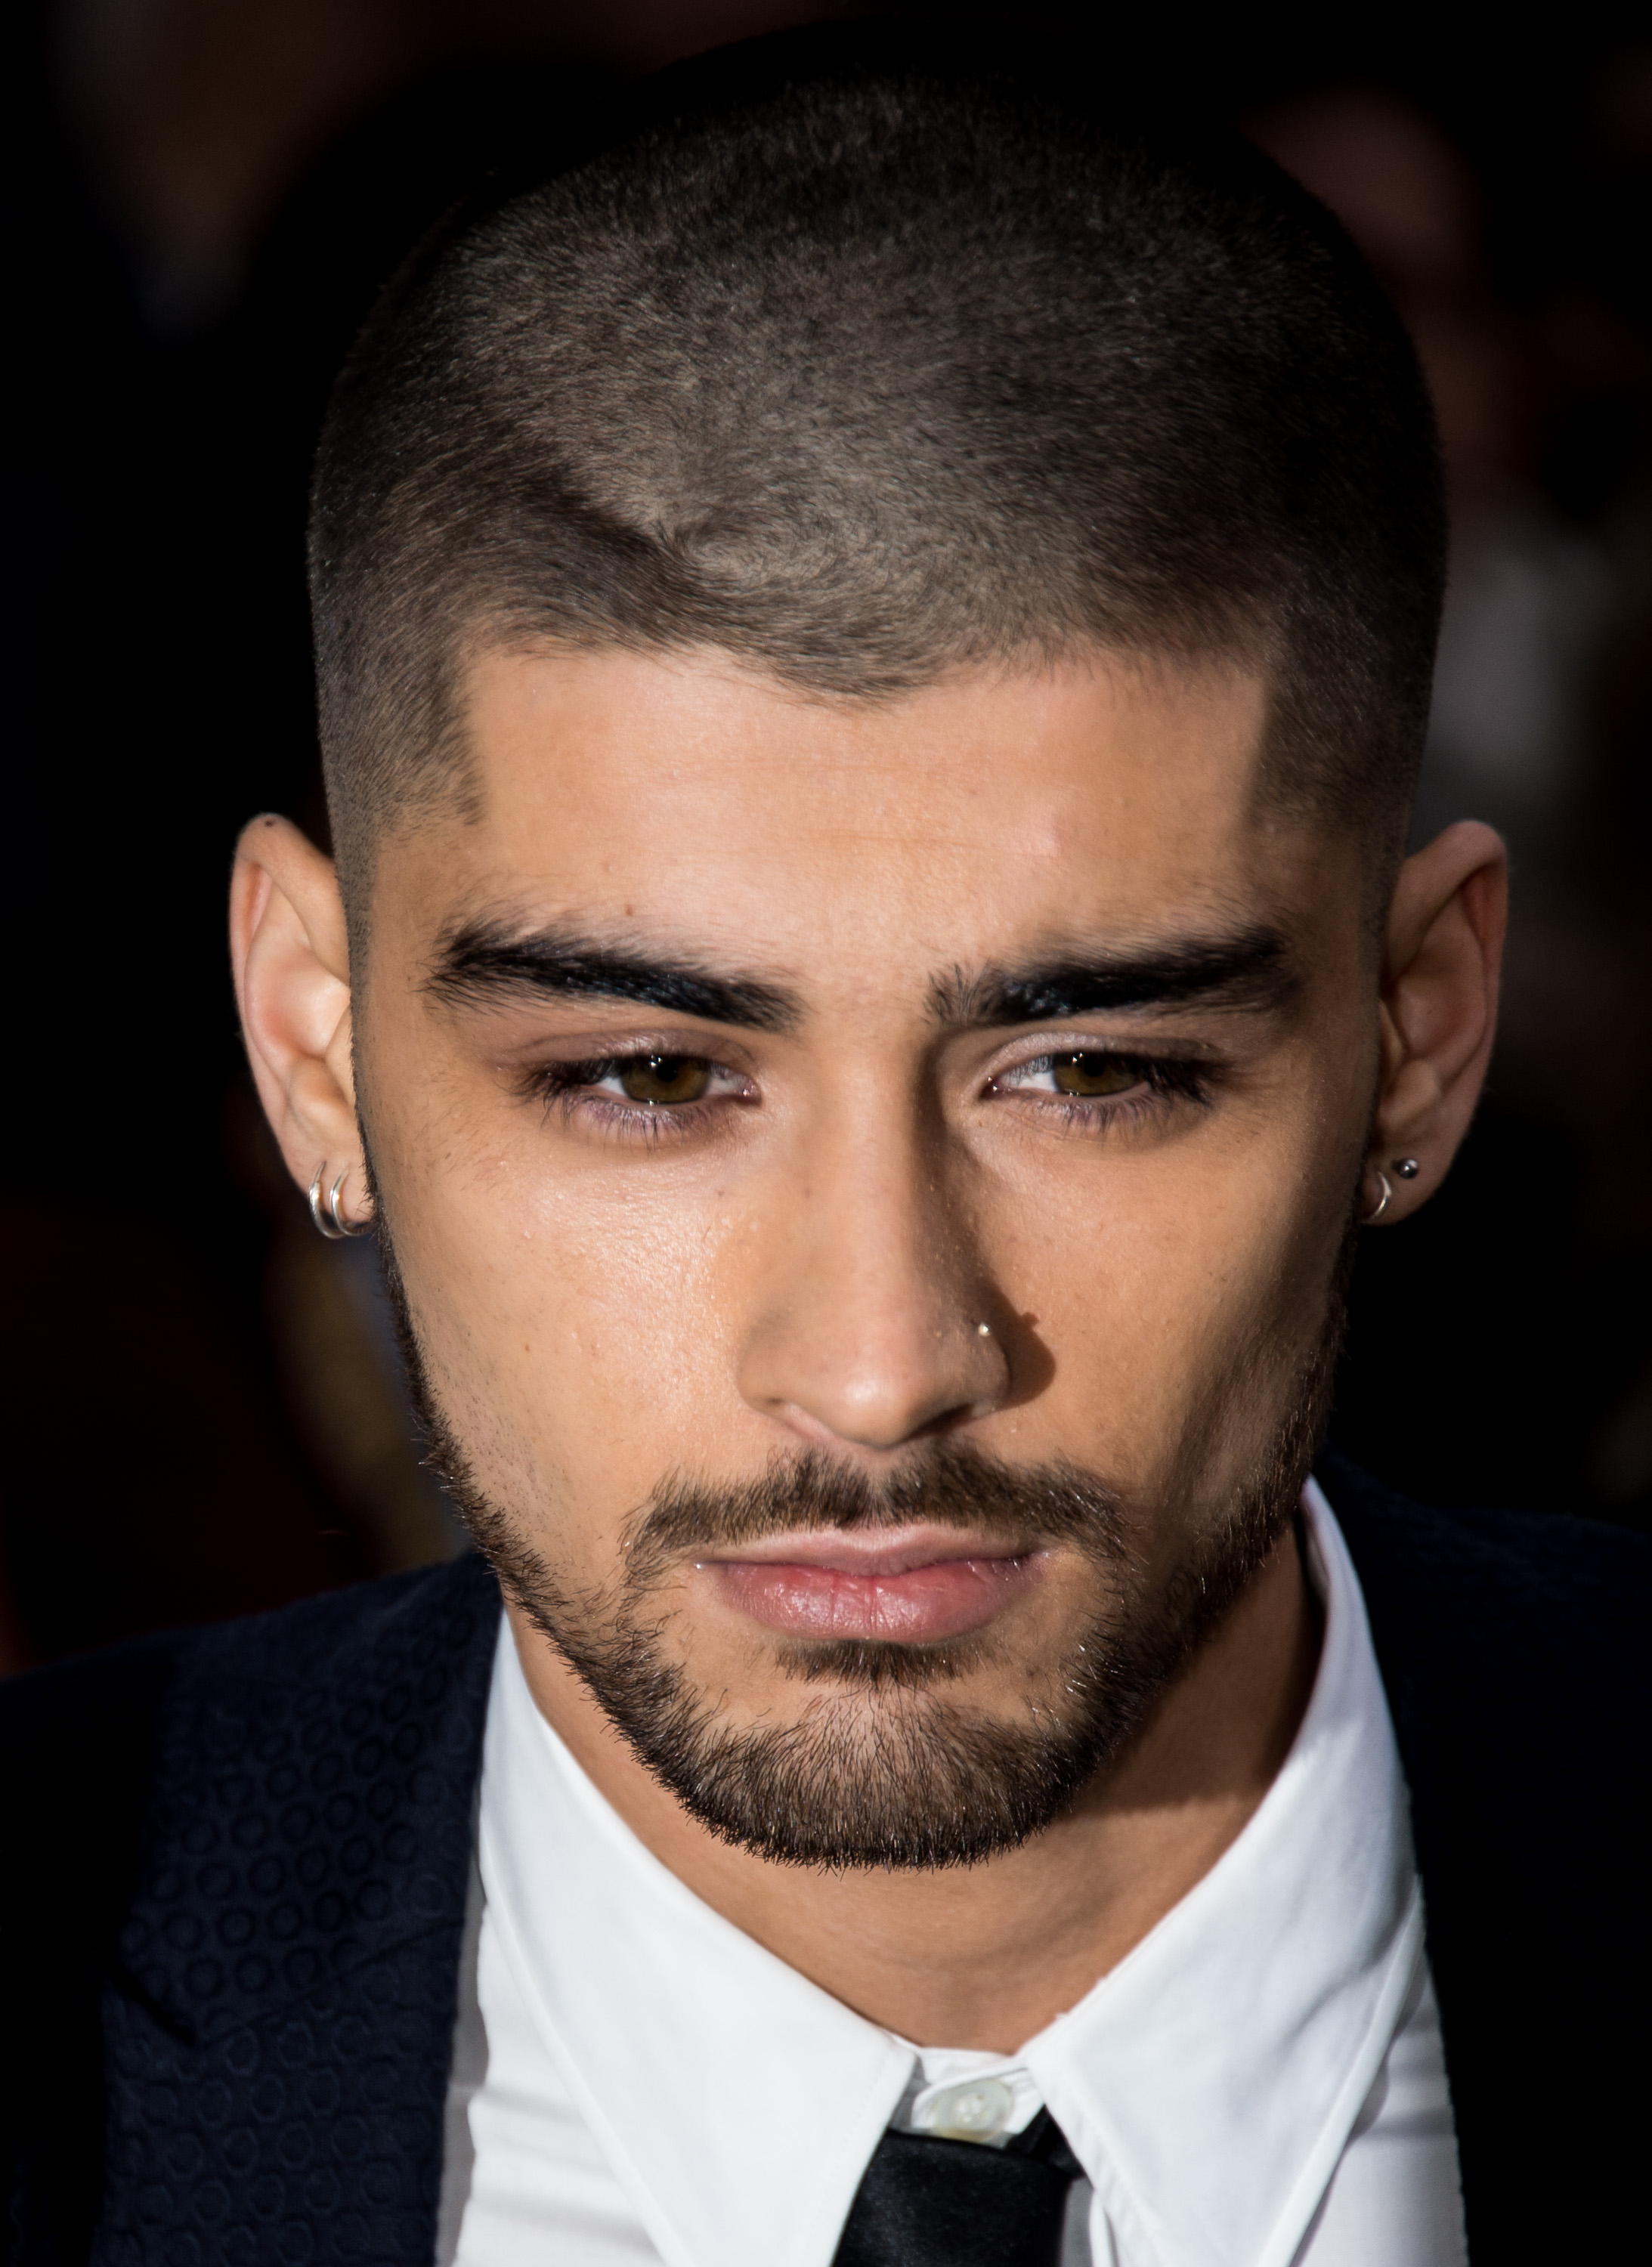 7 Zayn Malik Hairstyles That Are The Biggest Trends Of 2017